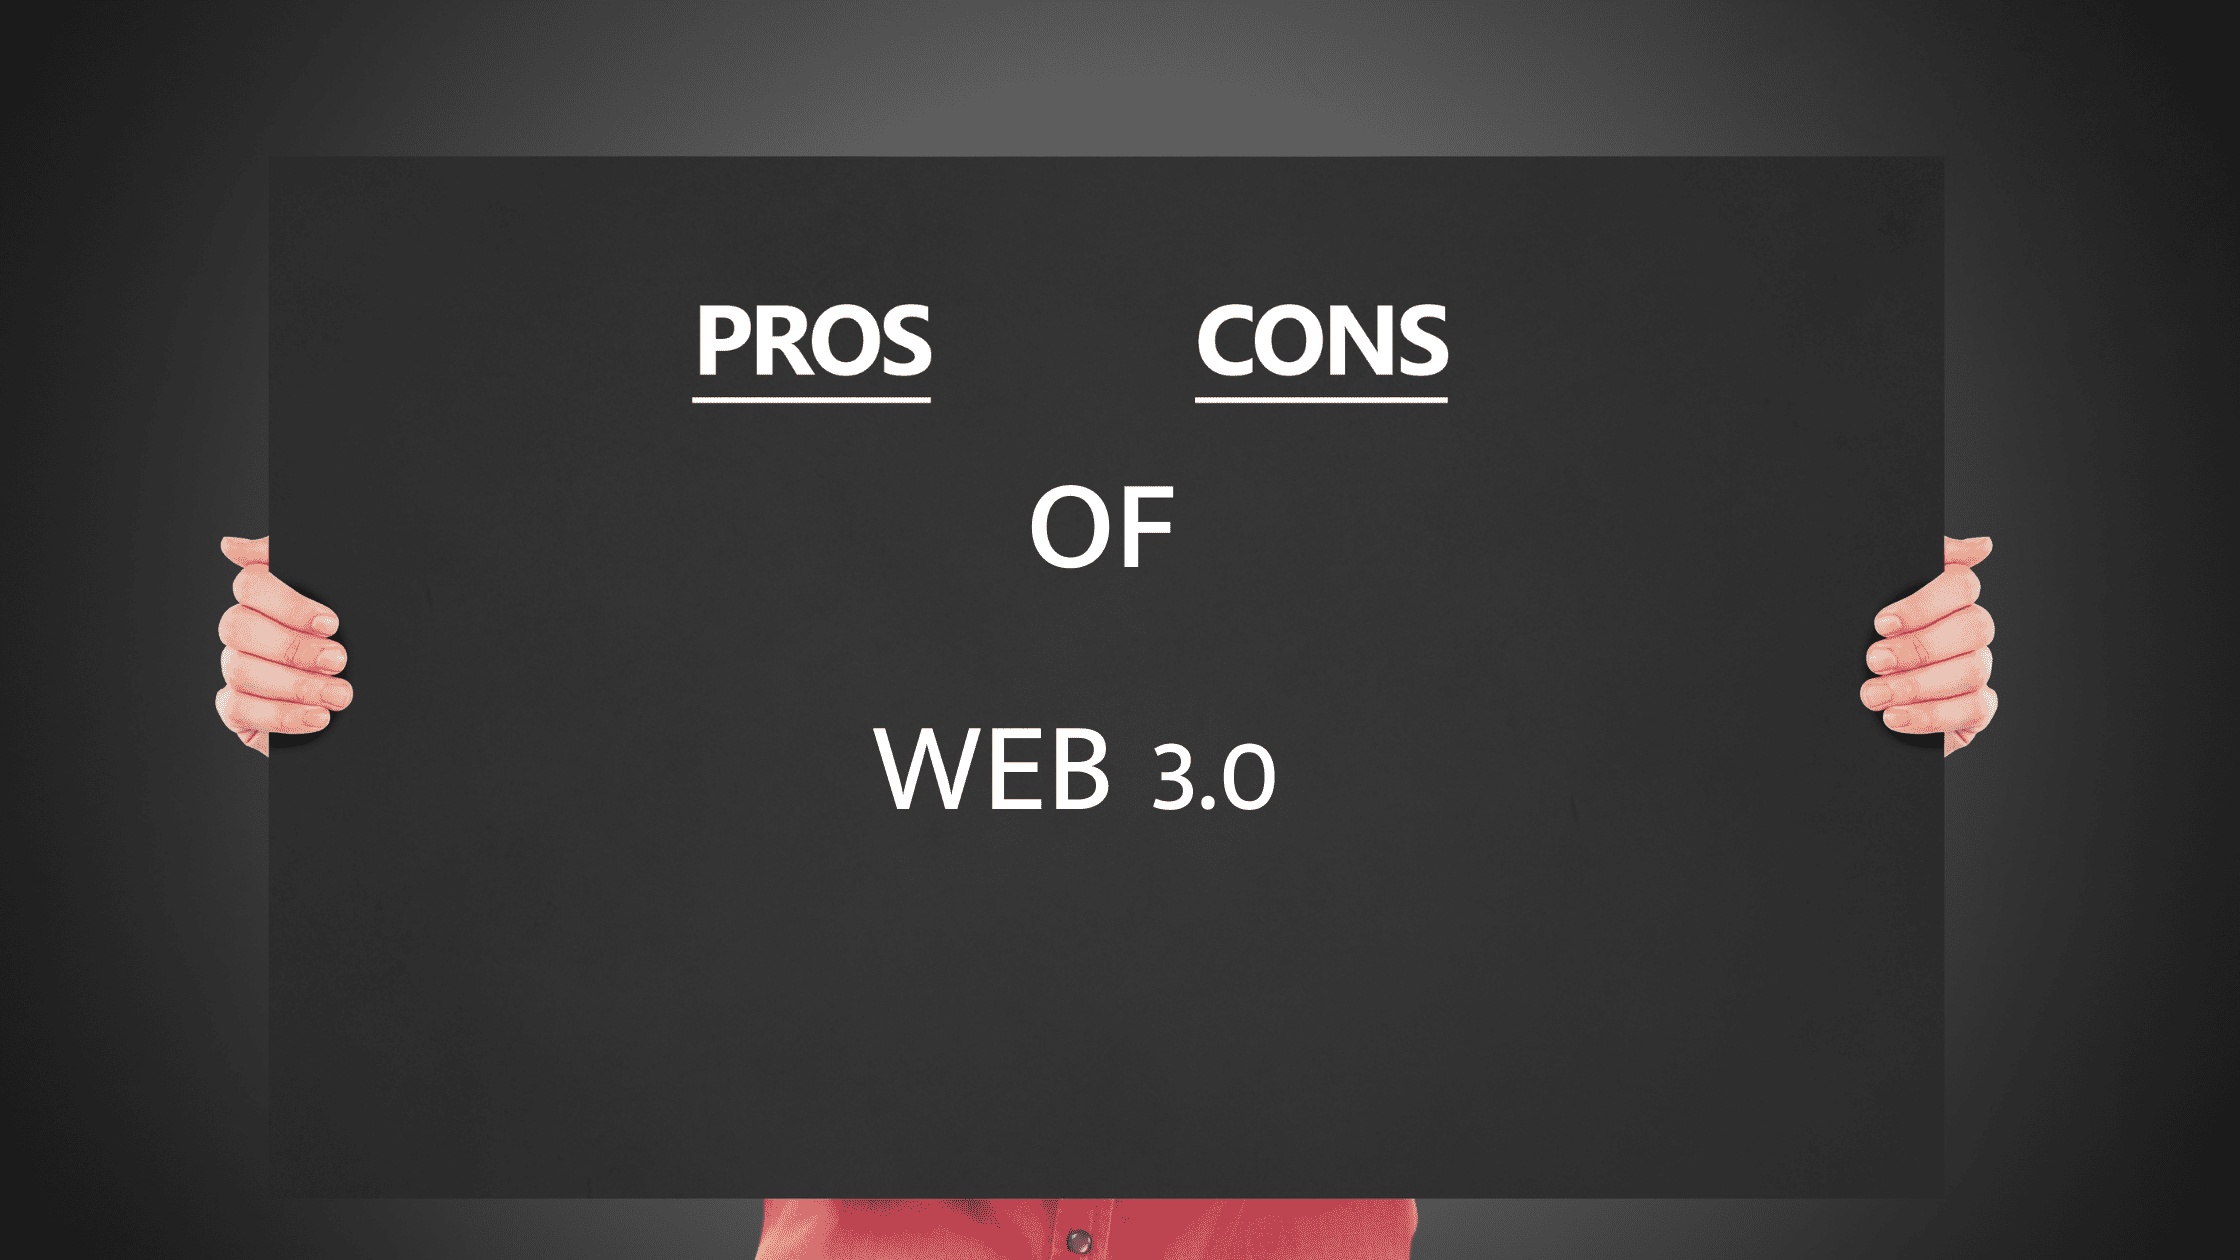 Pros and Cons of Web 3.0